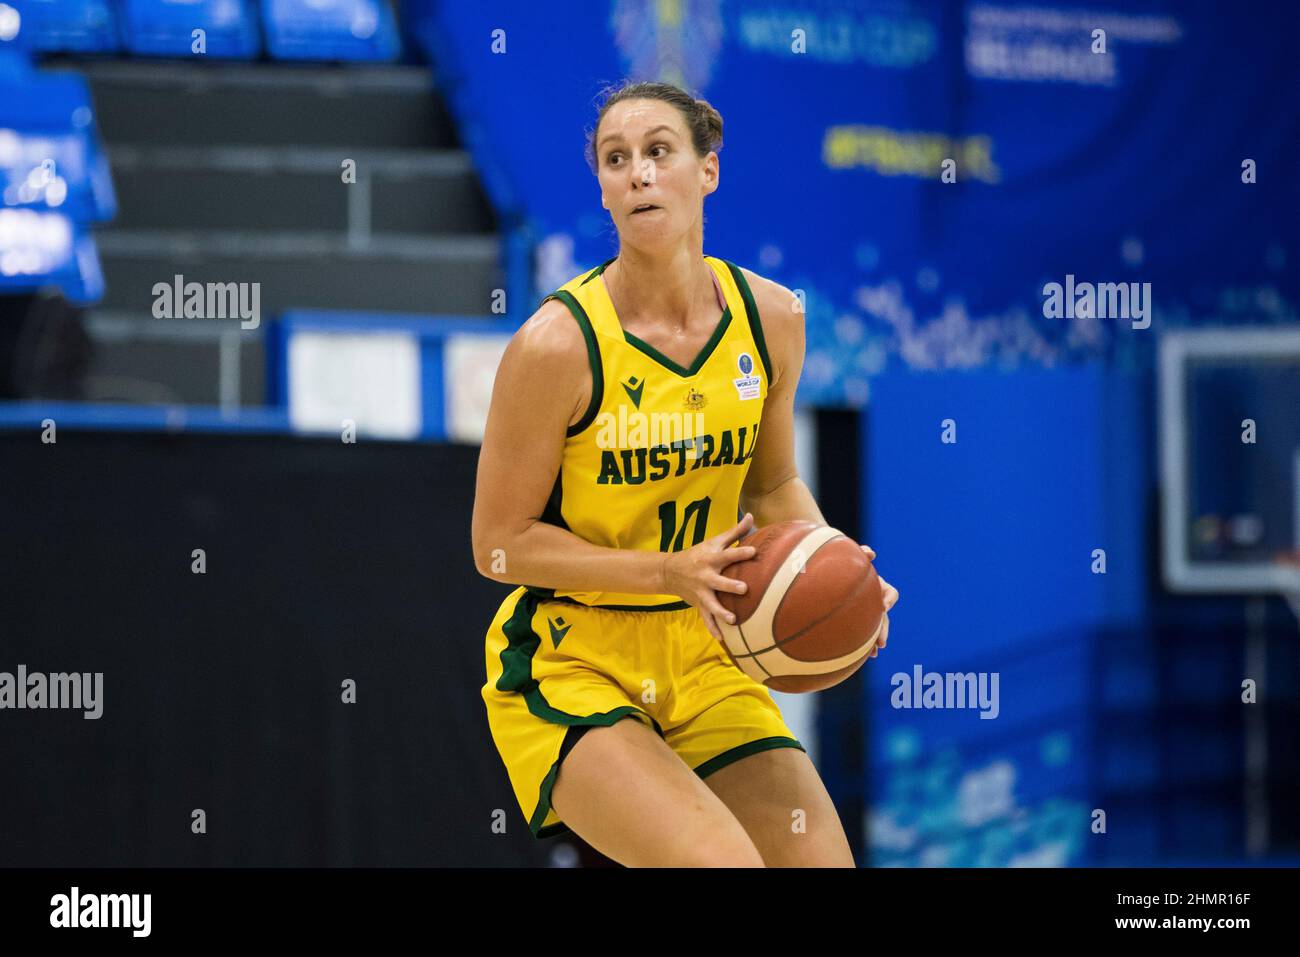 Belgrade, Serbia, 10th February 2022. Steph Talbot of Australia in action during the FIBA Women's Basketball World Cup Qualifying Tournament match between Australia v Brazil in Belgrade, Serbia. February 10, 2022. Credit: Nikola Krstic/Alamy Stock Photo